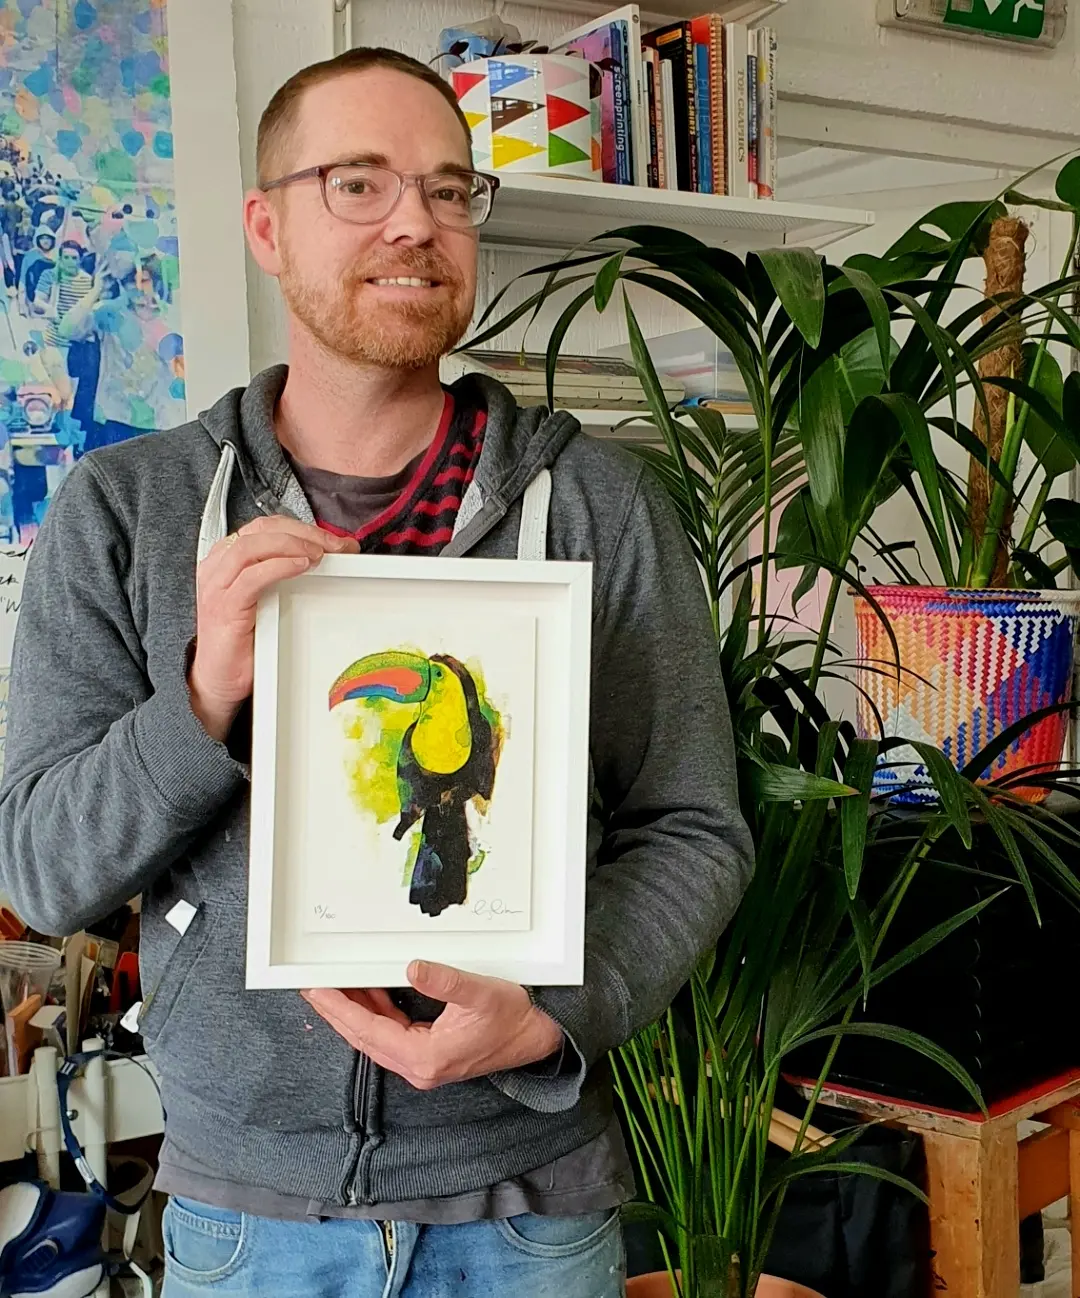 Here's me. Holding one of my handmade glittered screen-prints. Which I hope brings an extra bit of colour to any interior.